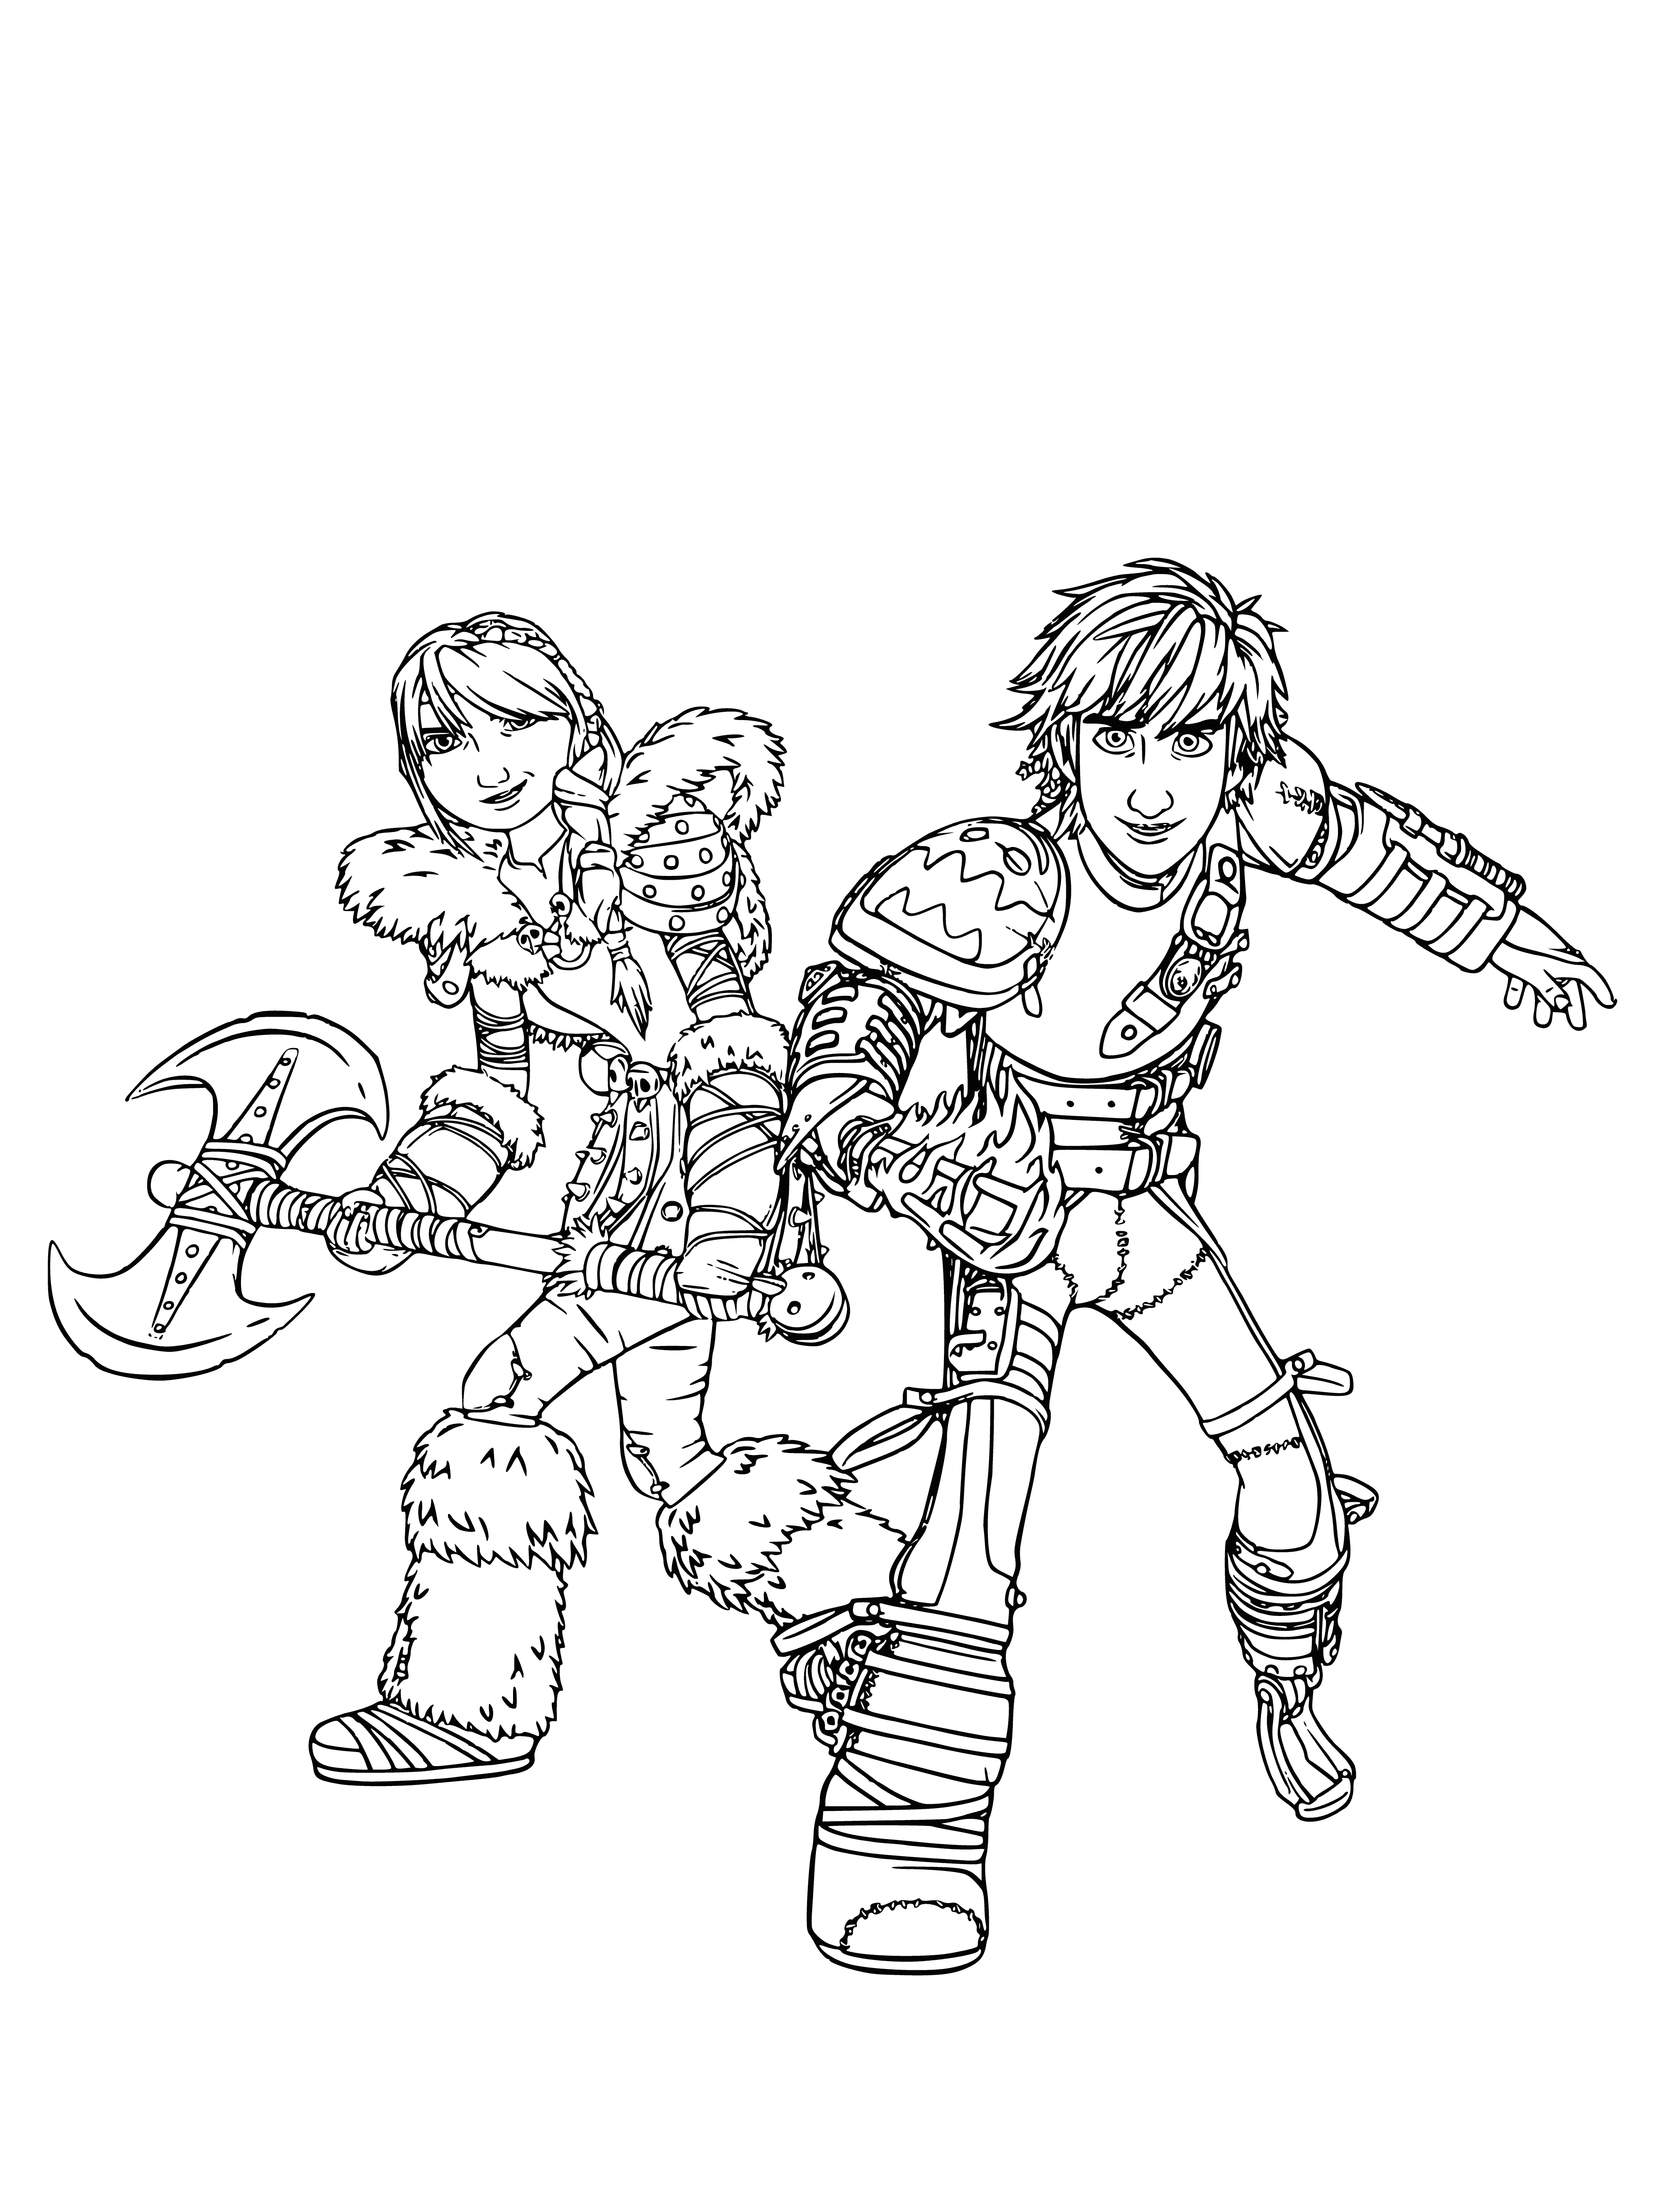 coloring page: Icking and Astrid, two young Vikings, stand on a cliff with a dragon in the distance. Wearing matching brown fur cloaks, they admire the sea.